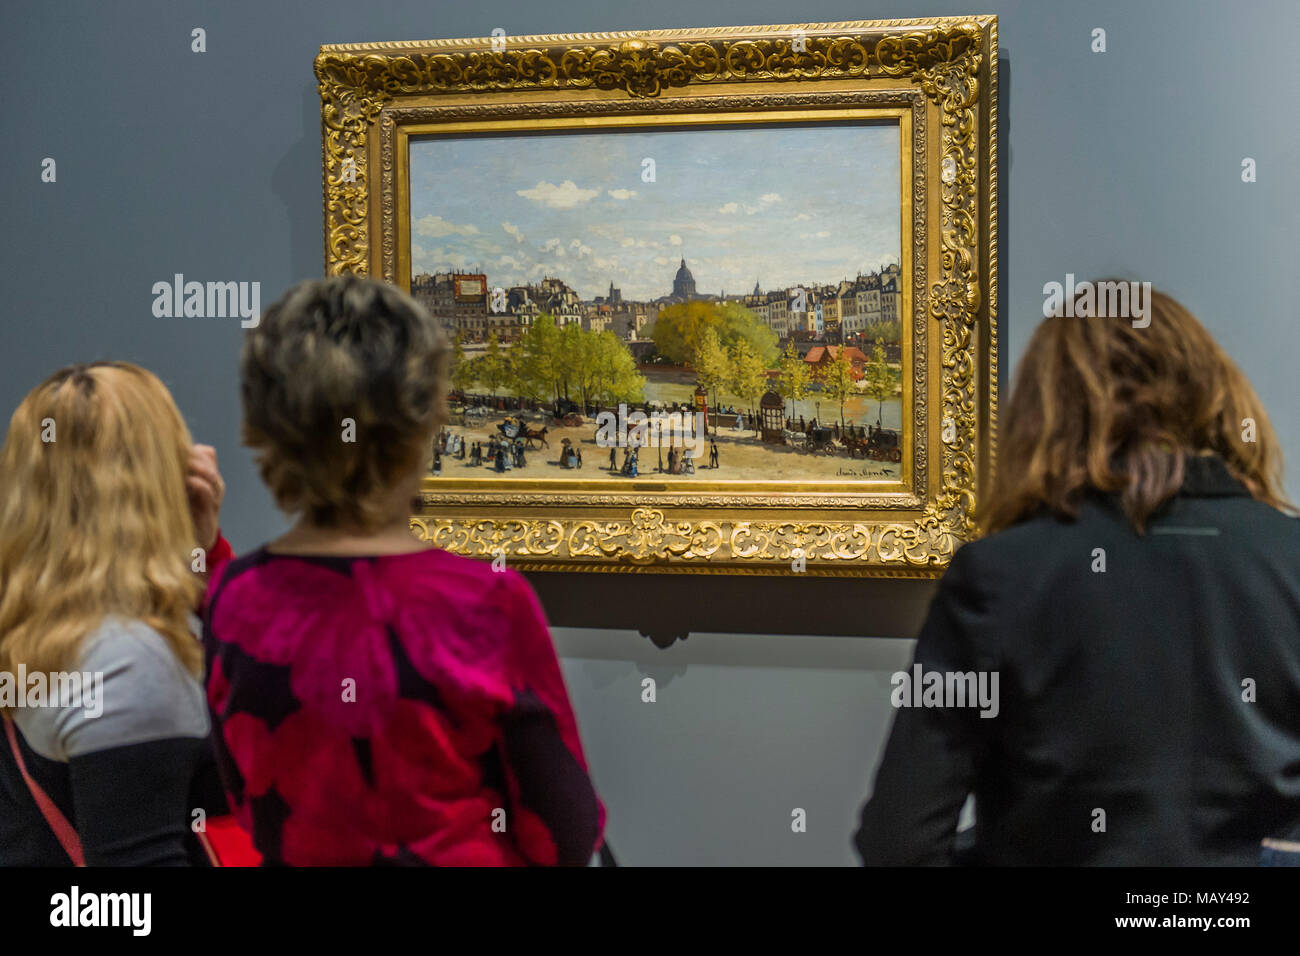 National Gallery, London, UK. 5th April, 2018. The Quai du Louvre, 1867 - The Credit Suisse Exhibition: Monet & Architecture a new exhibition in the Sainsbury Wing at The National Gallery. Credit: Guy Bell/Alamy Live News Stock Photo